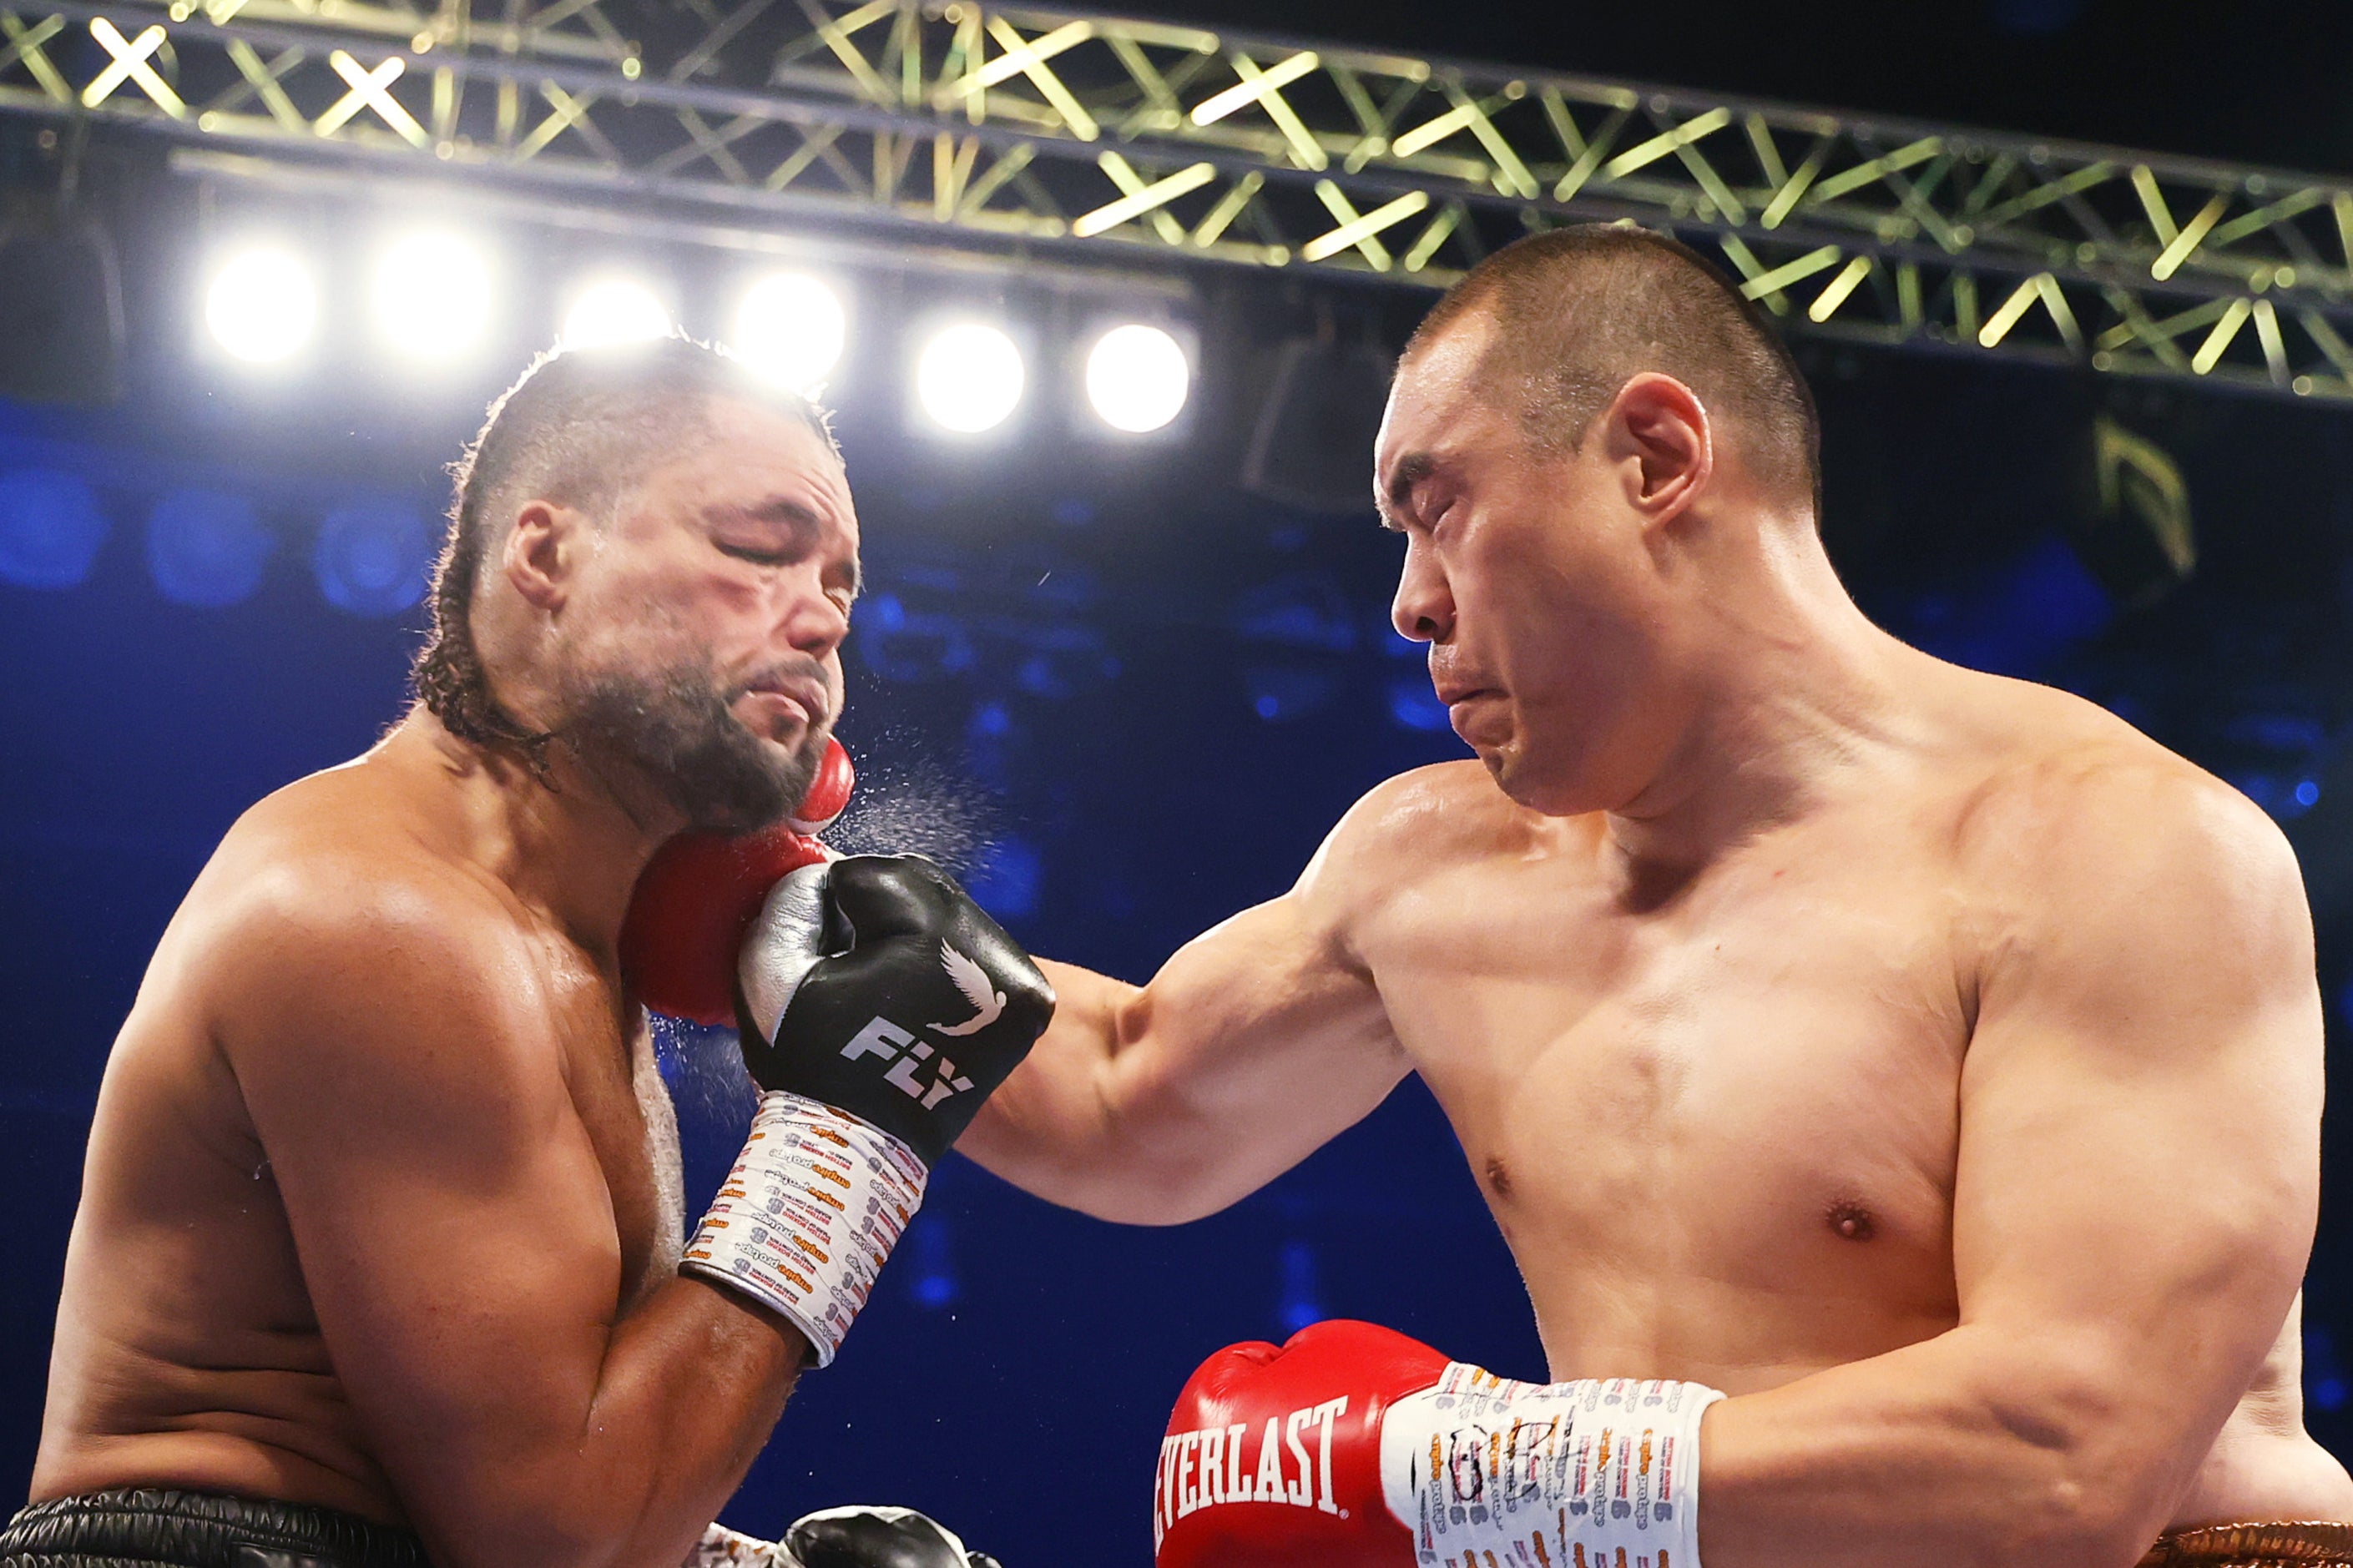 Joe Joyce vs Zhilei Zhang 2 time When do ring walks start in UK and US tonight? The Independent